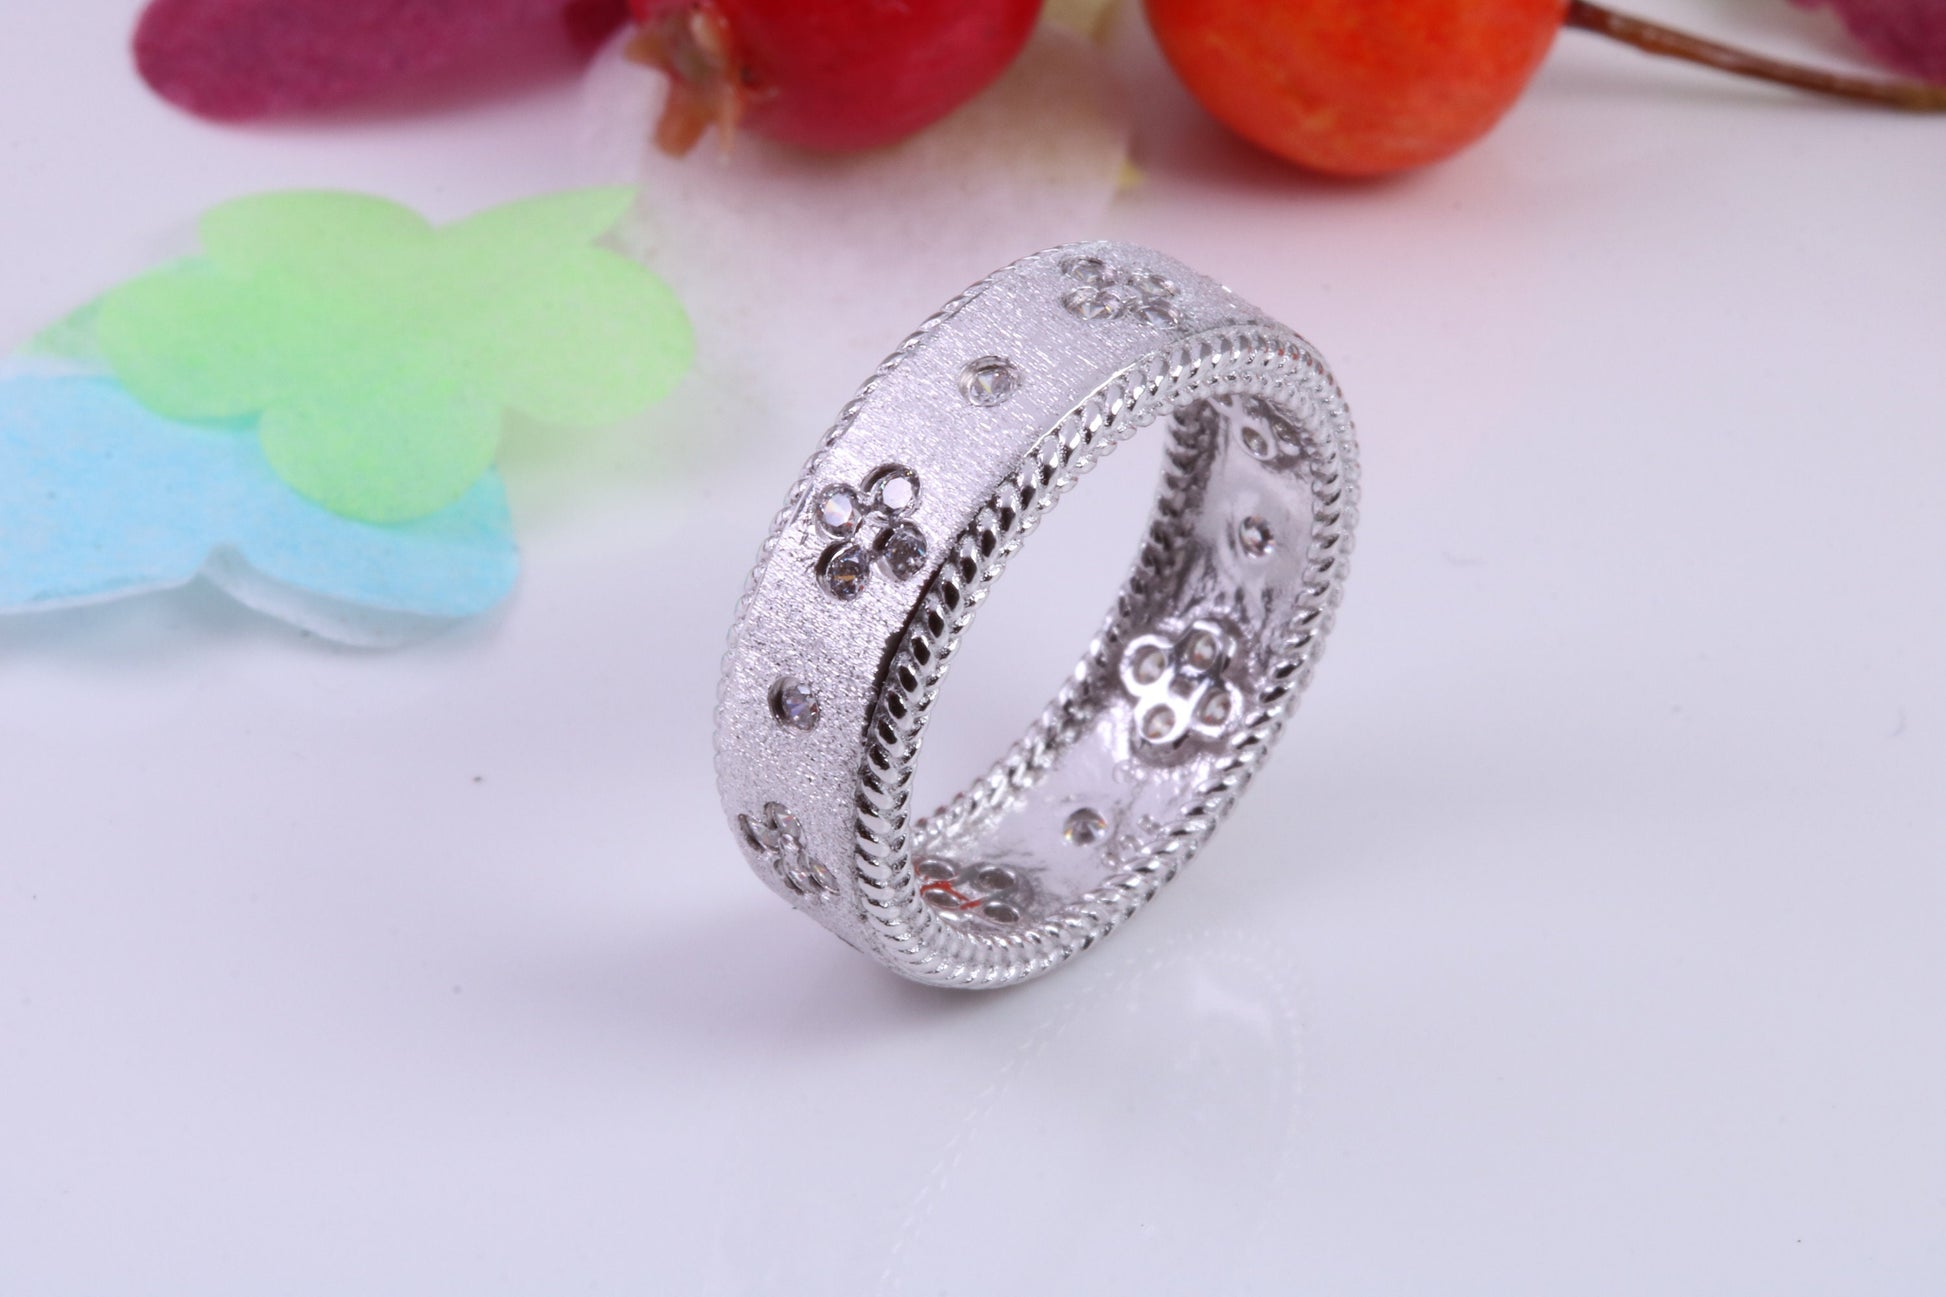 7 mm Wide Very Dressy Cubic Zirconia set Ring, Made from Solid Silver